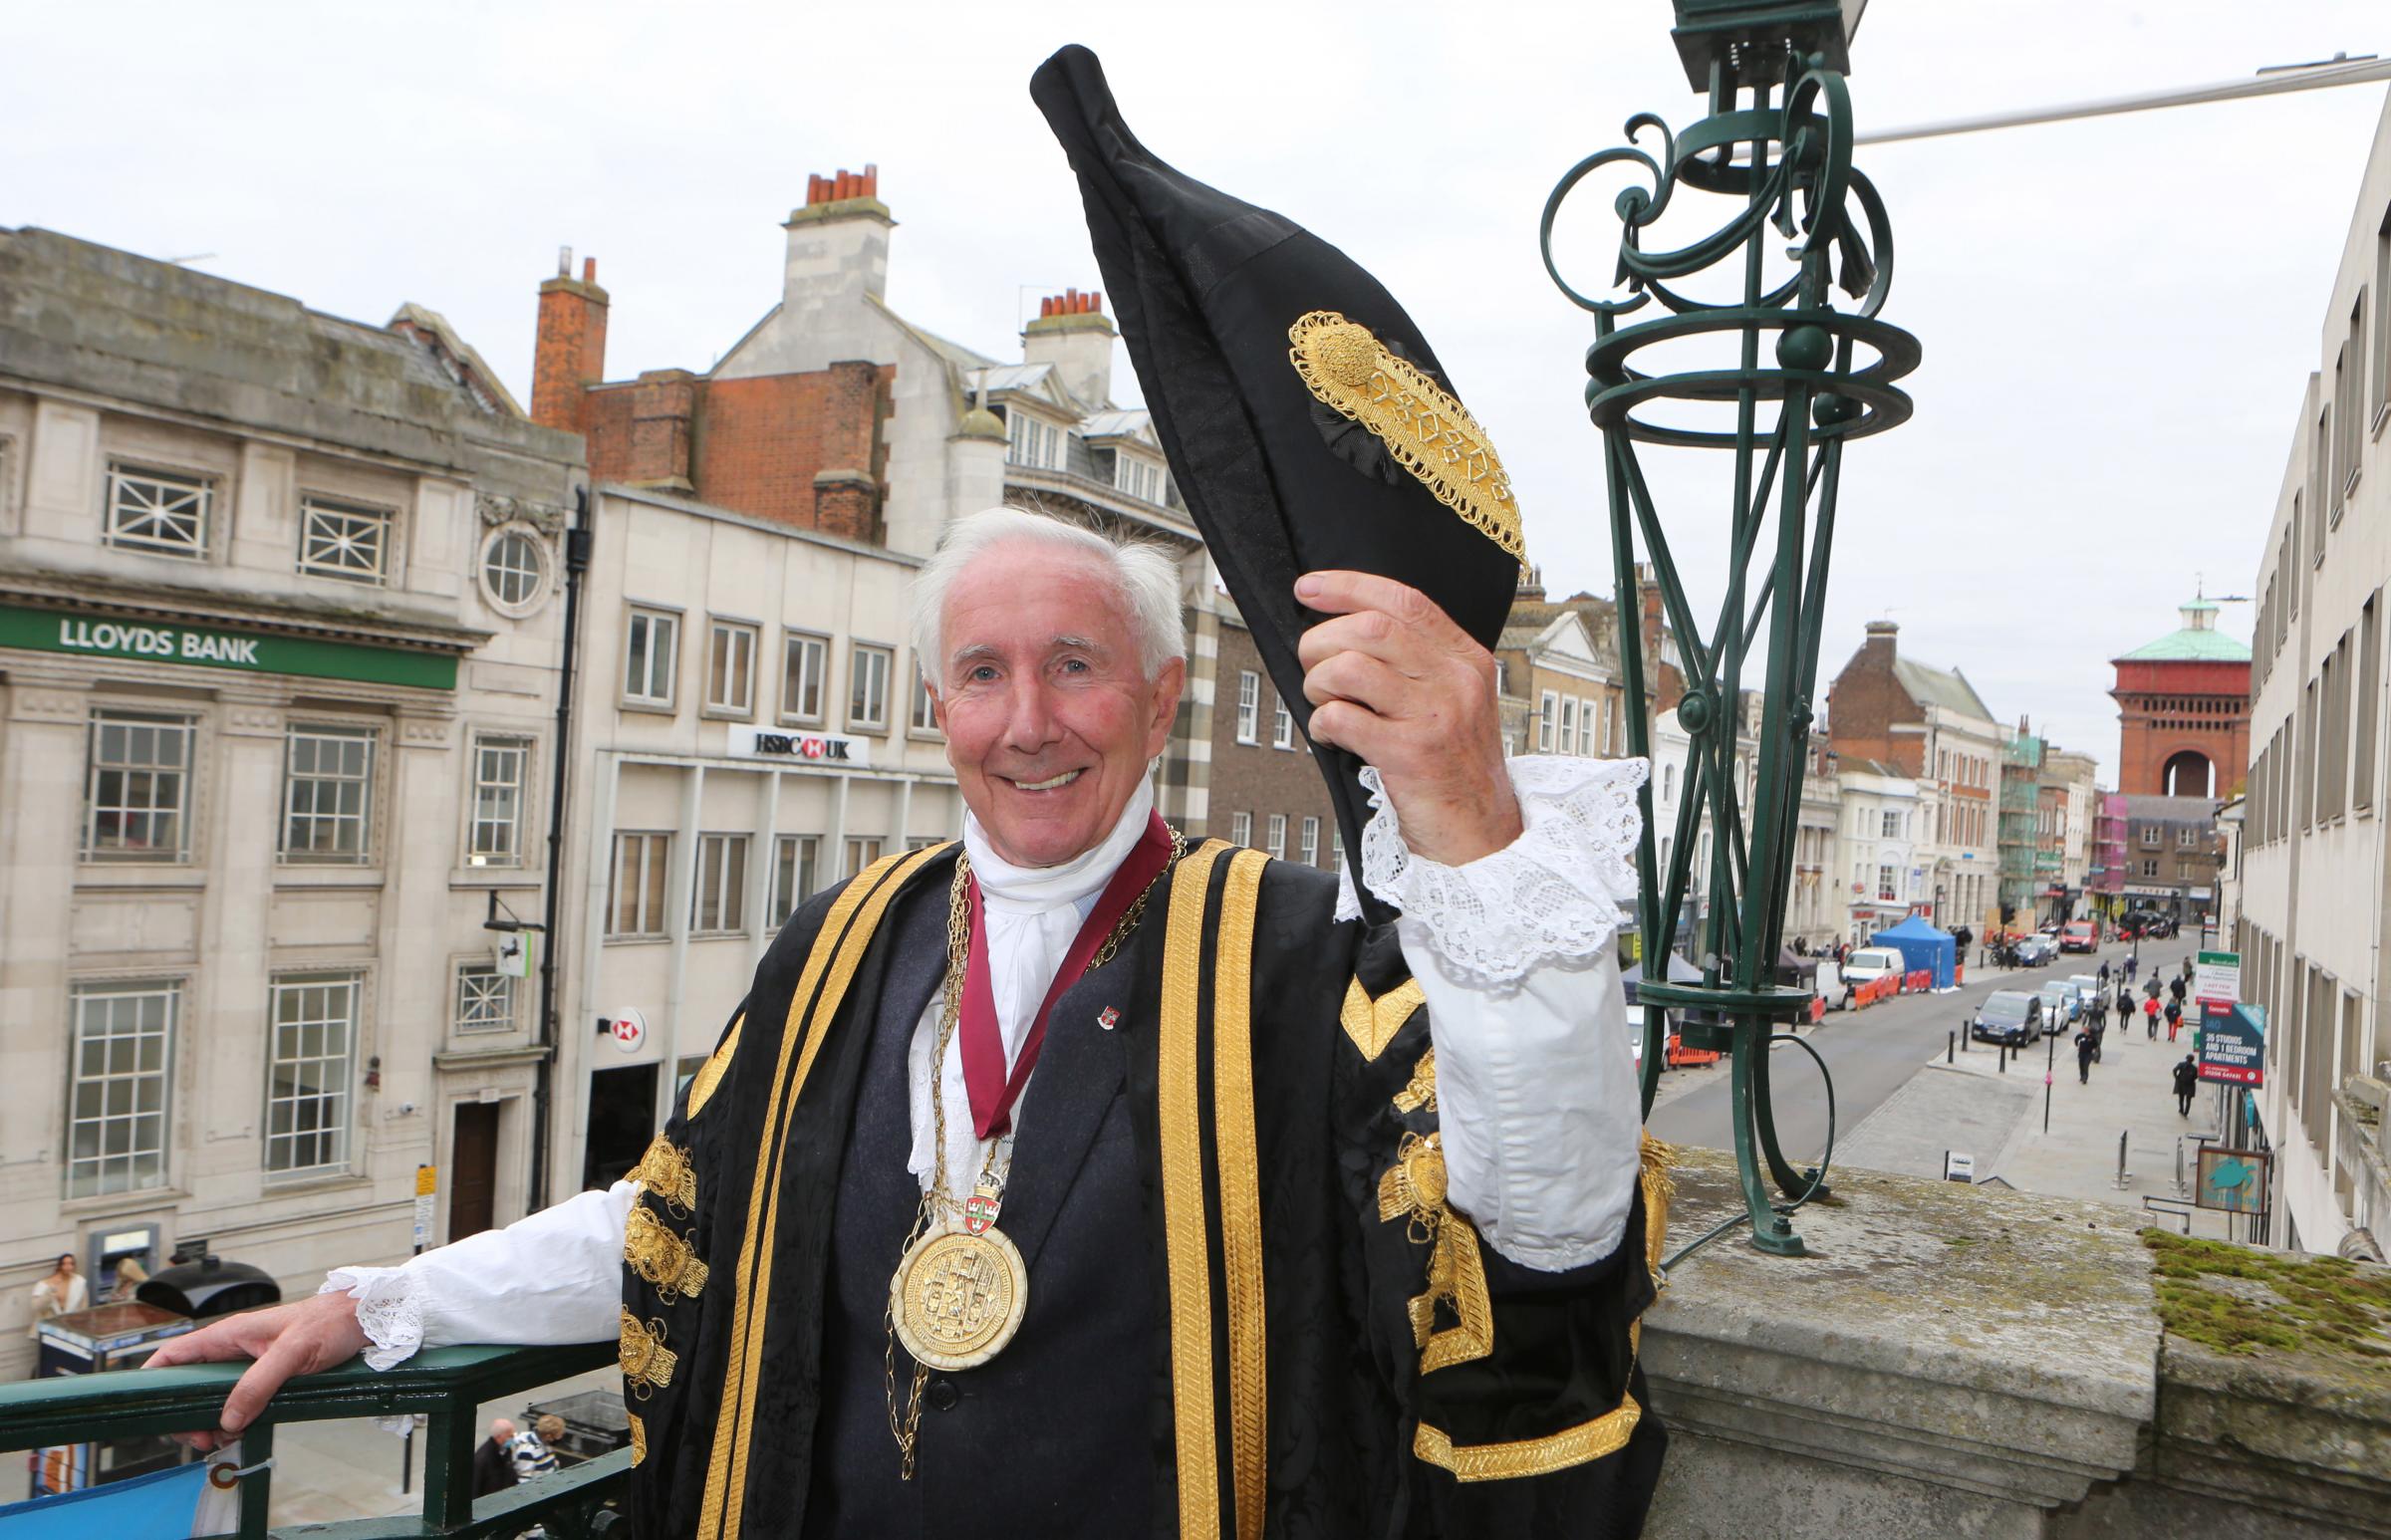 Historic position - current Colchester mayor Robert Davidson, incidentally the fifth farmer to hold the title since 1974